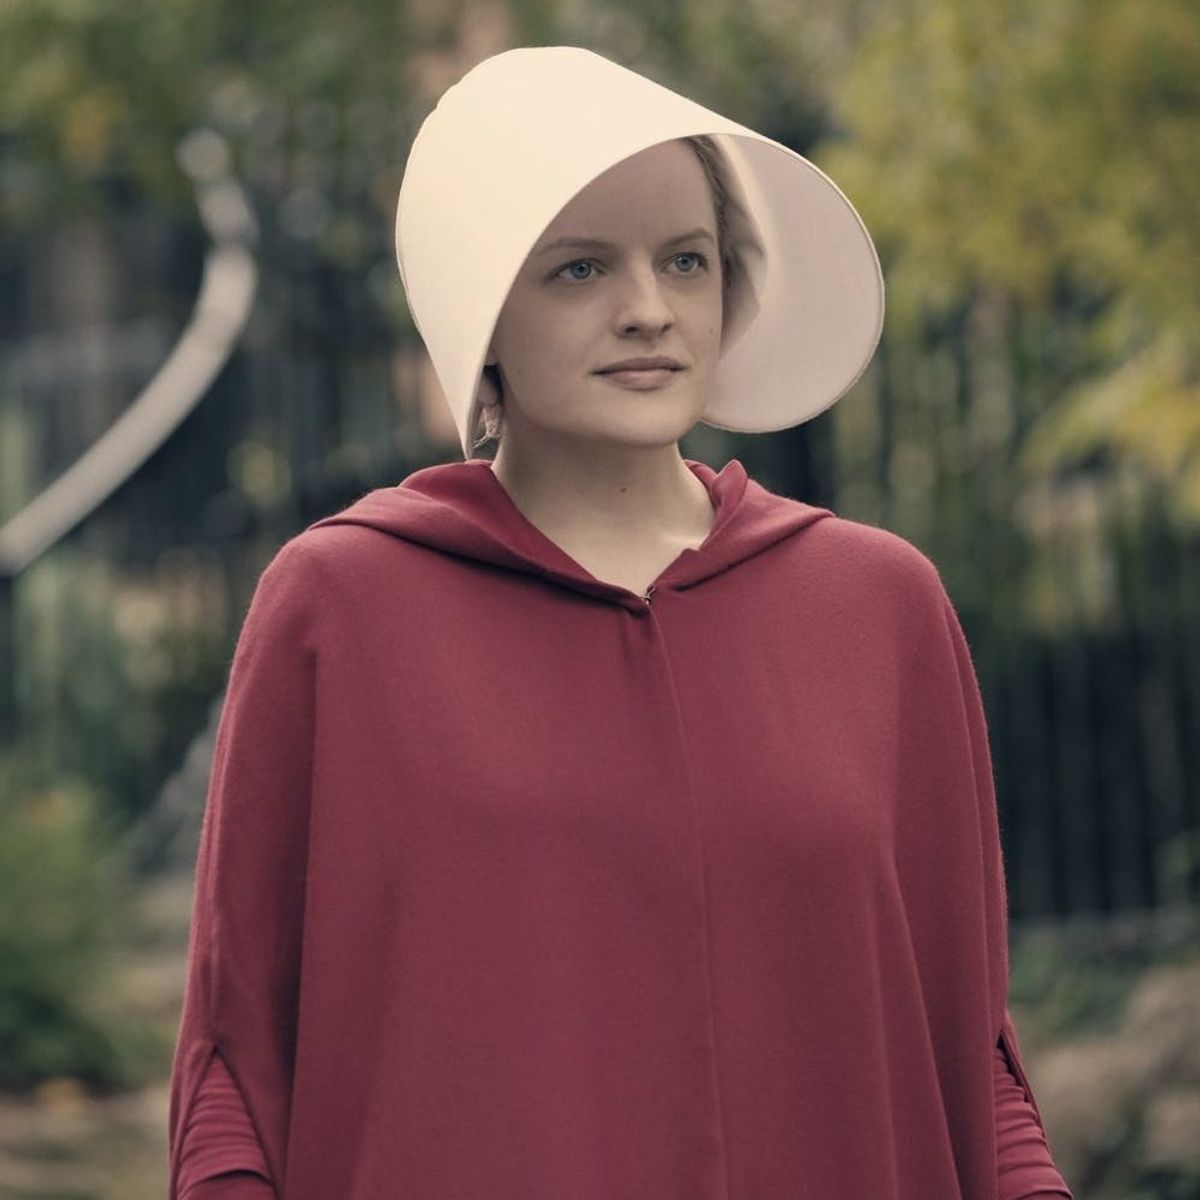 The Handmaid’s Tale Gets a Second Season, Which Confirms They’re Going Beyond Atwood’s Novel to Tell the Story